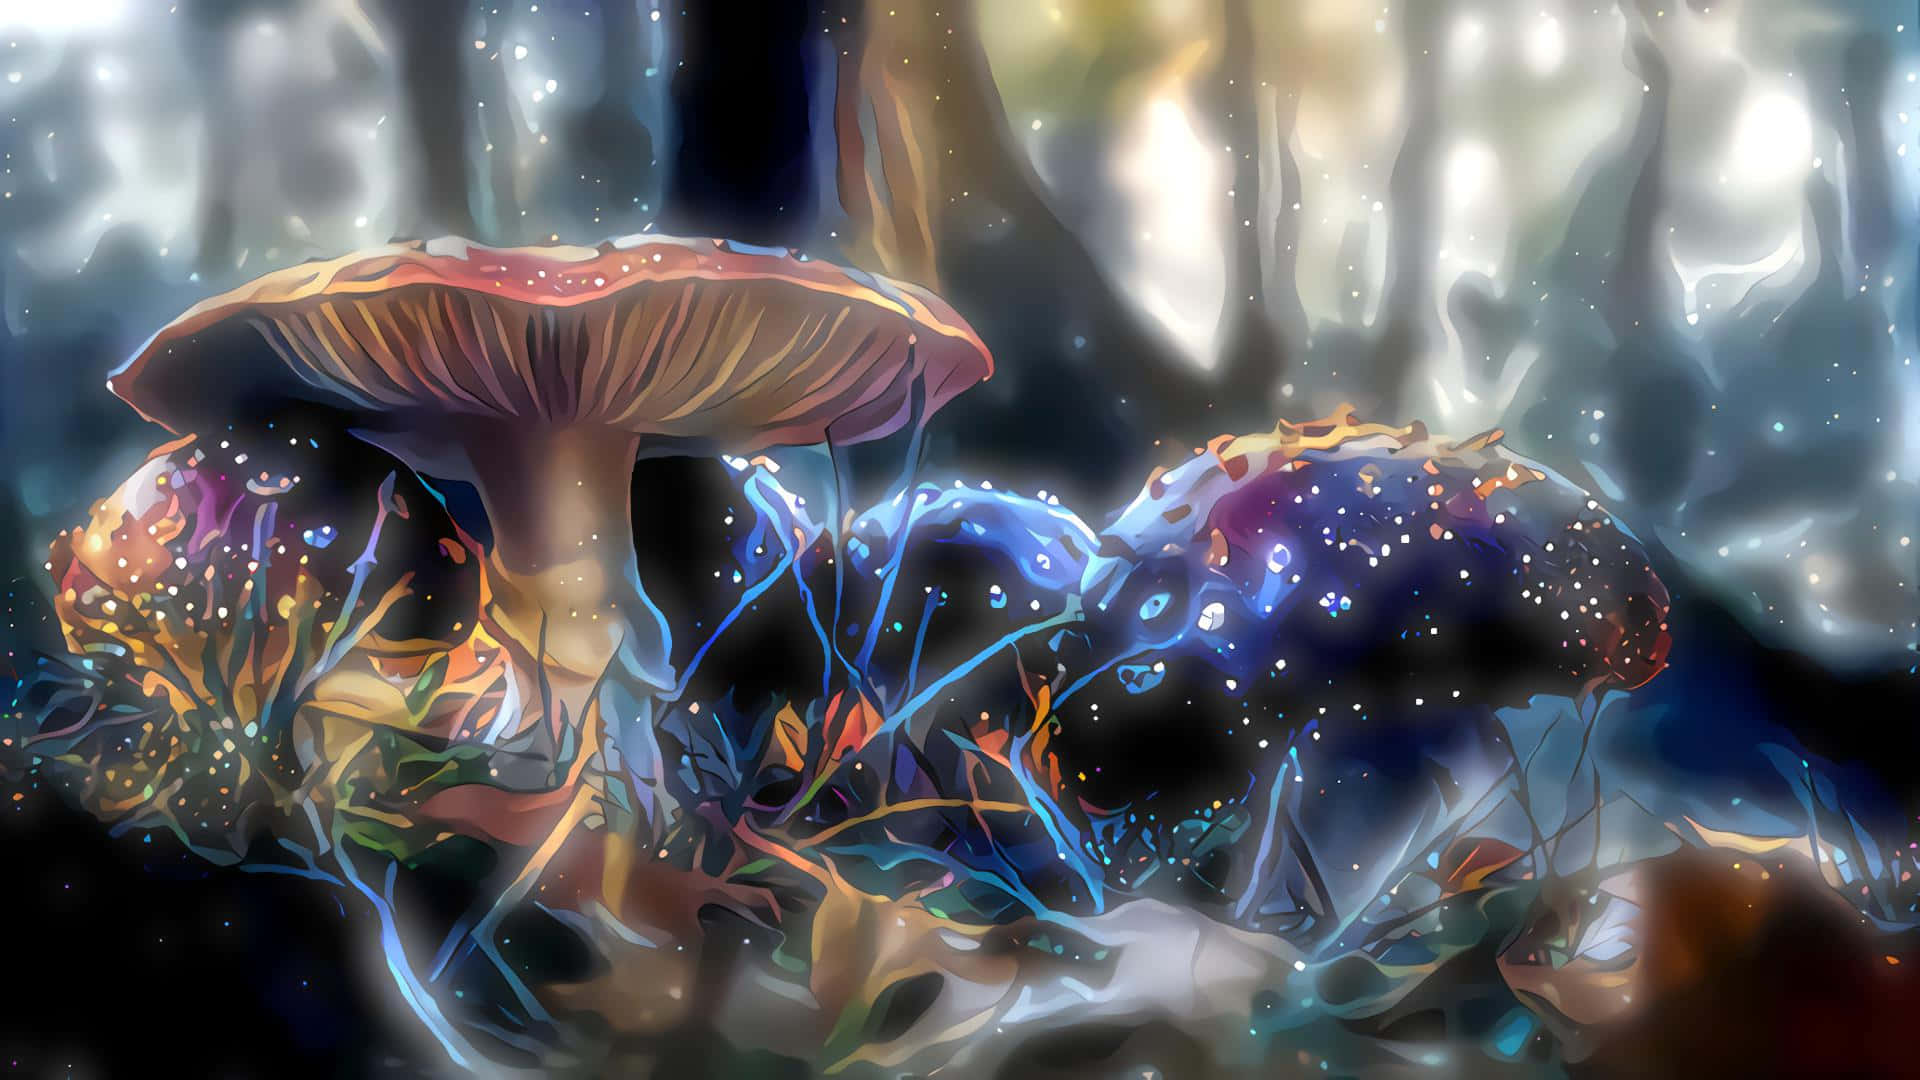 Enchanting Fungus With Glowing Cap Digital Art Picture